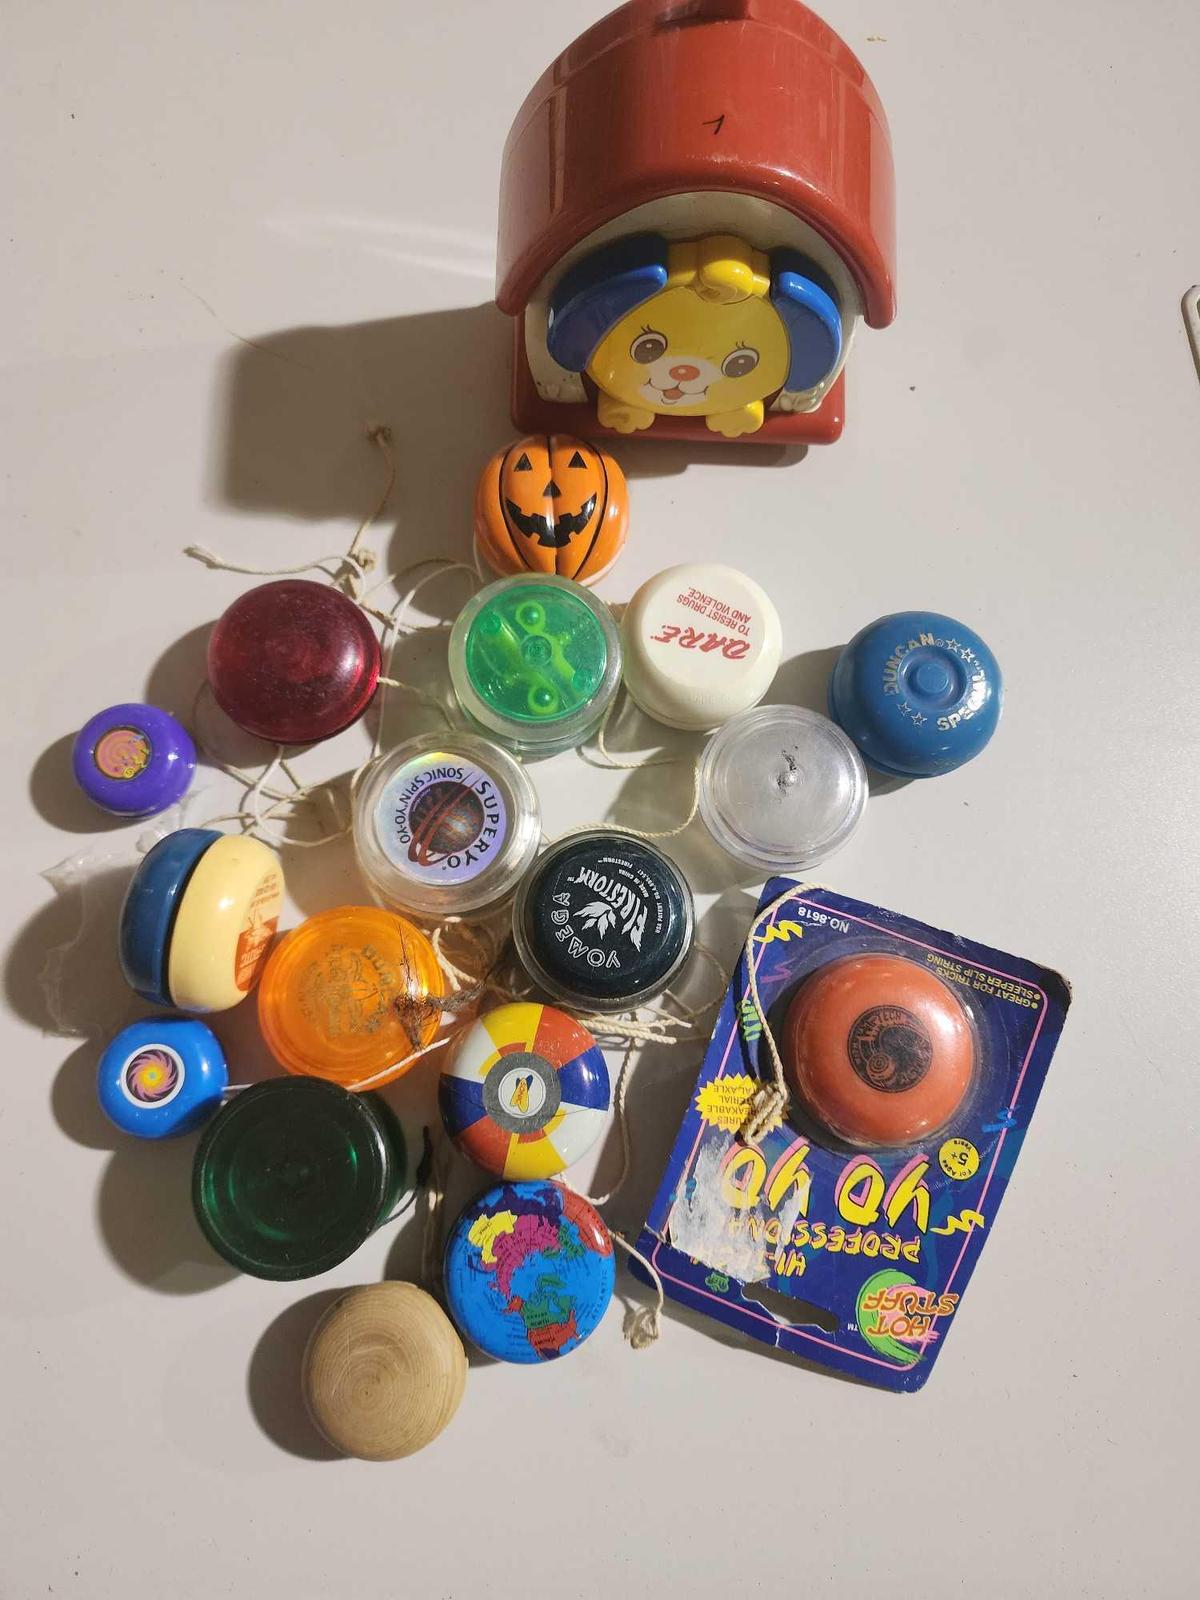 One wind-up toy and a box of old YoYo's. Used.